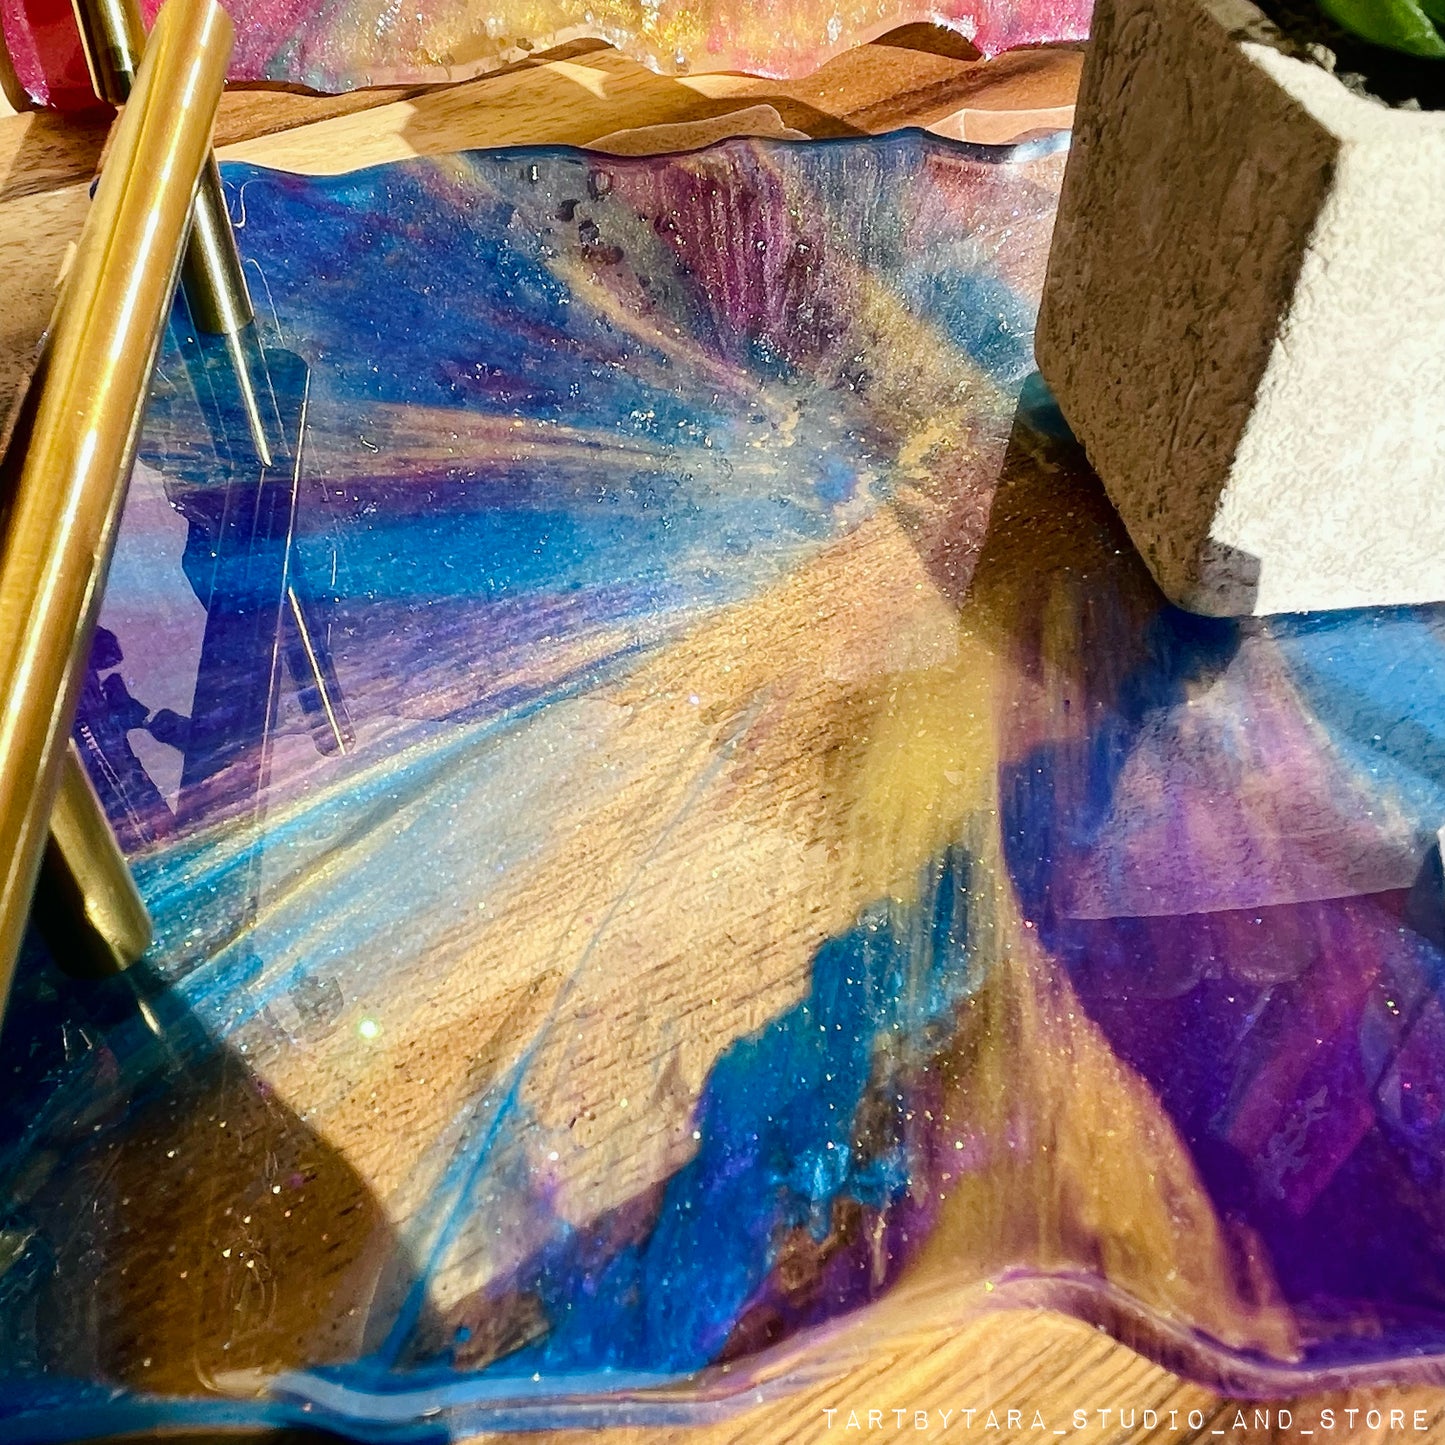 Geode tray Class - Wednesday 3/20 @ 6pm